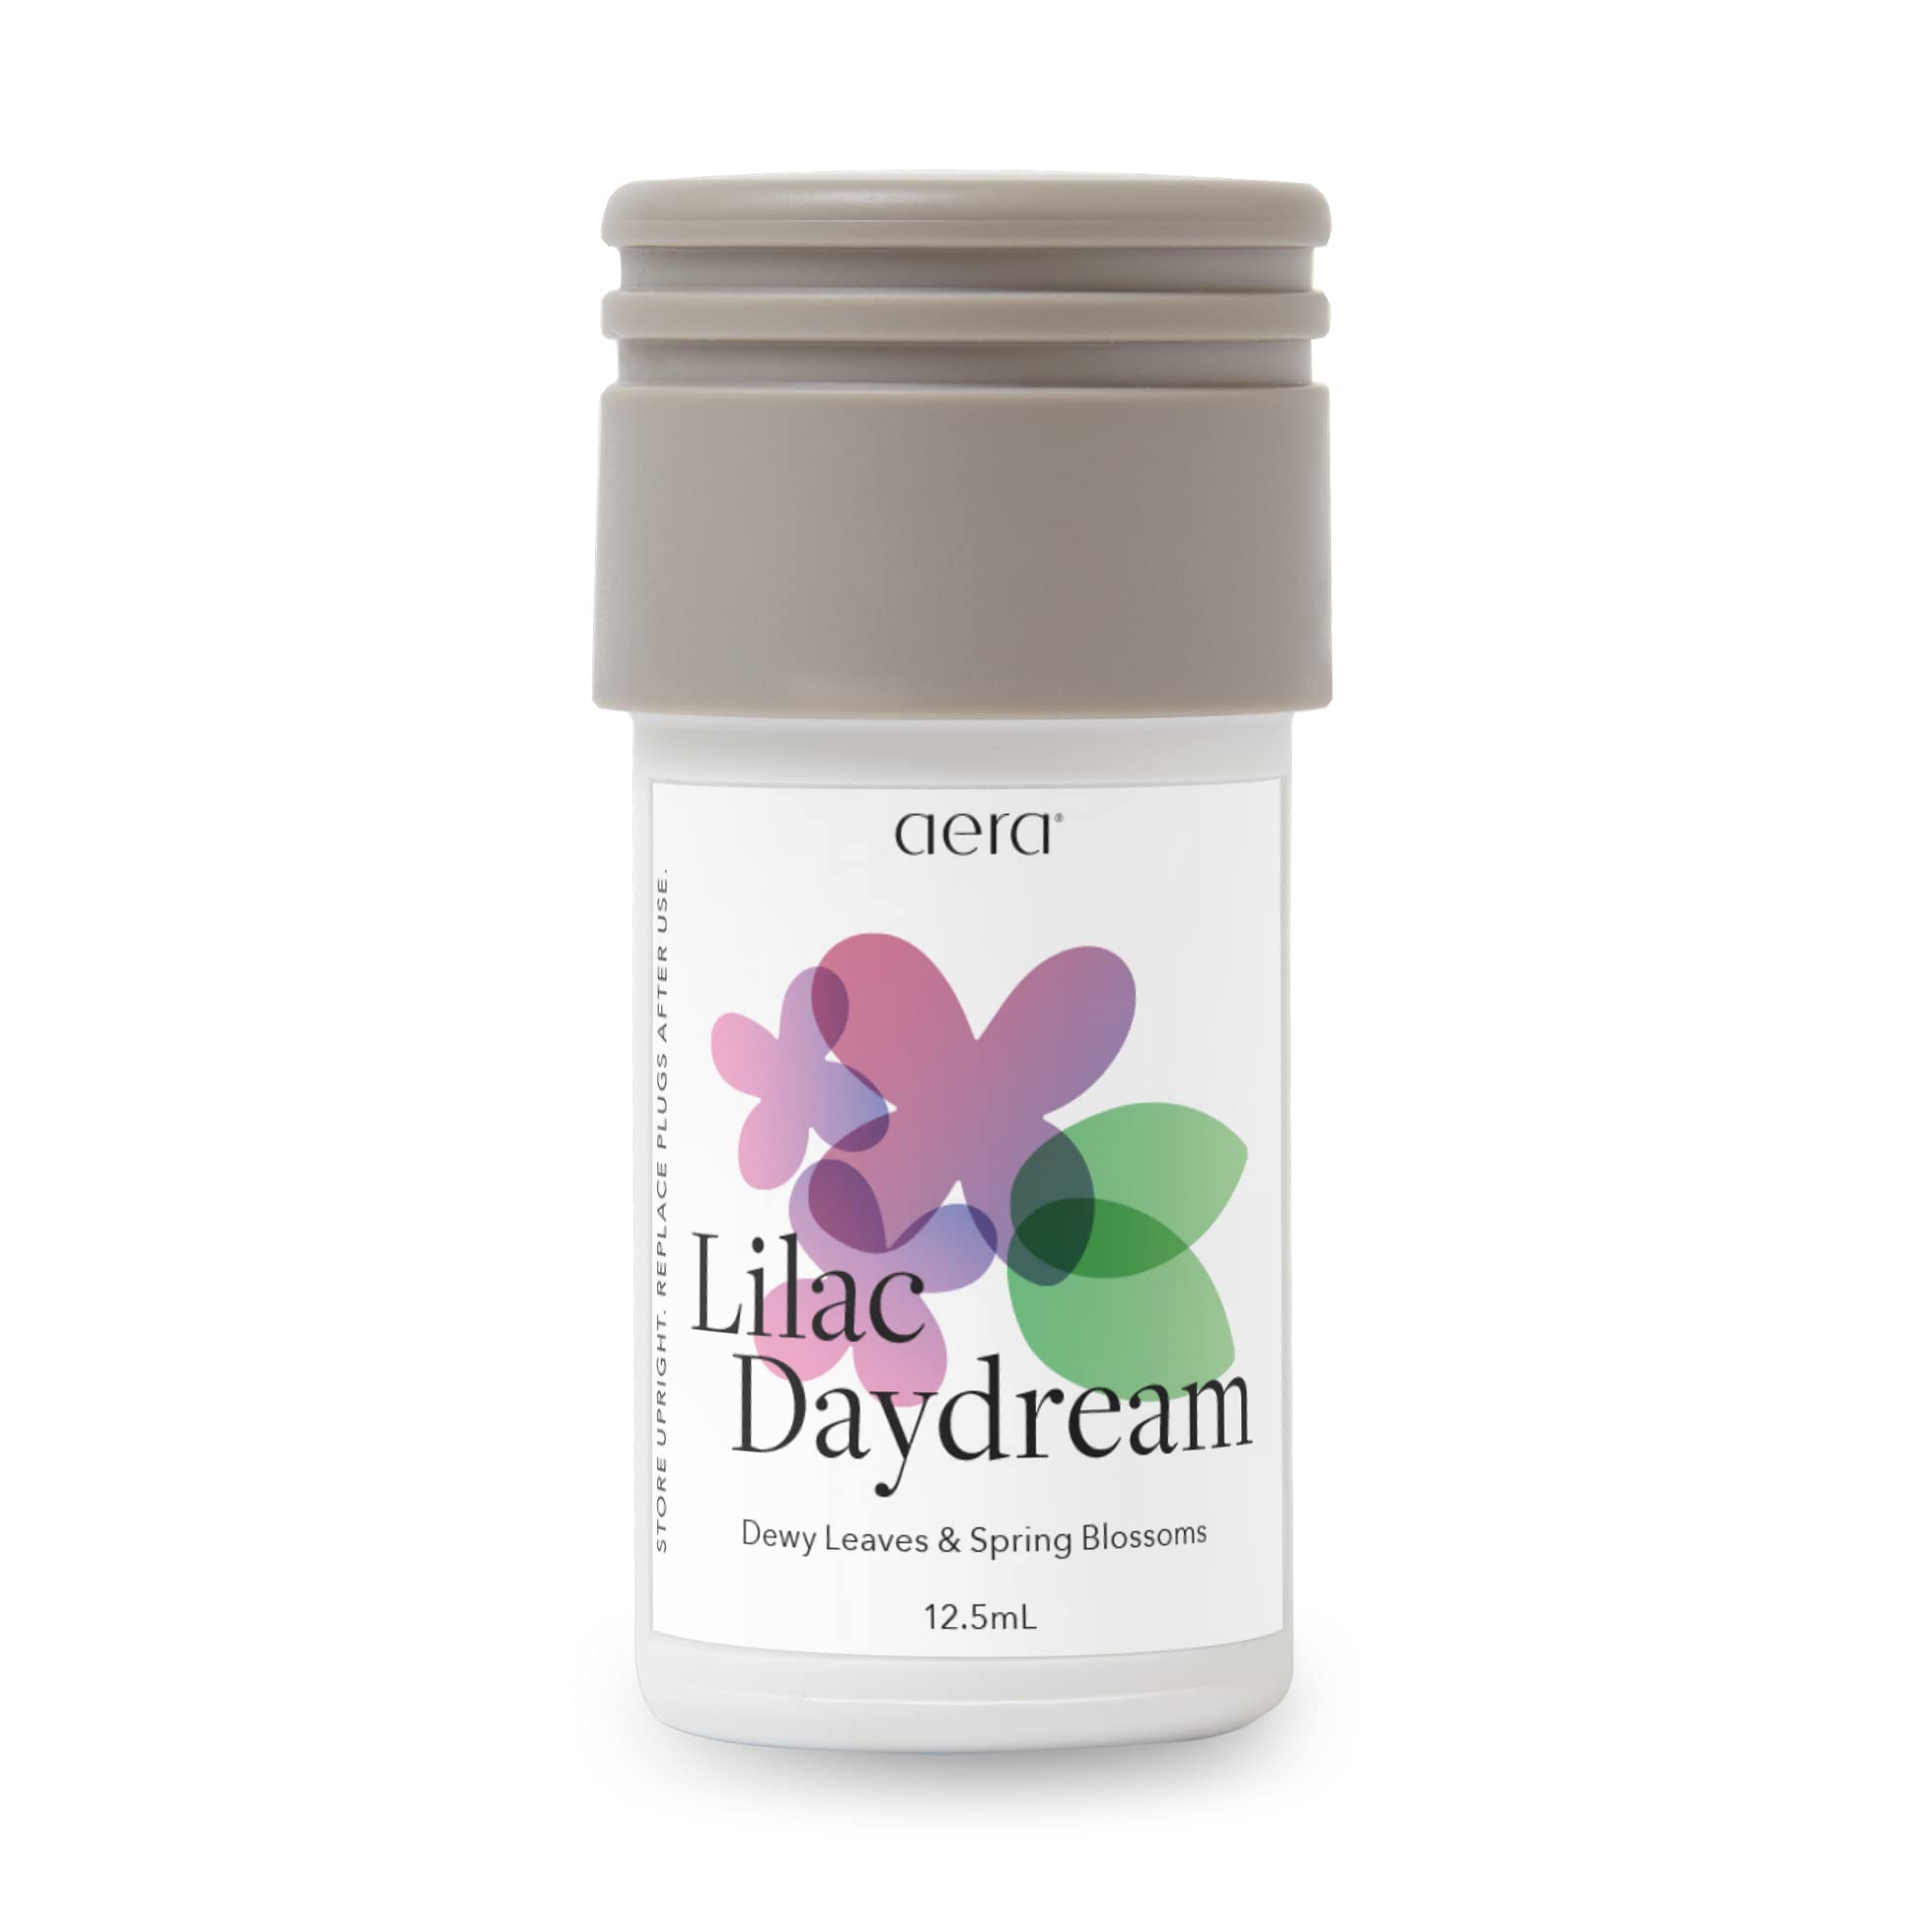 Aera Mini Lilac Daydream Home Fragrance Scent Refill - Notes of Dewy Leaves and Spring Blossoms - Works with The Aera Mini Diffu